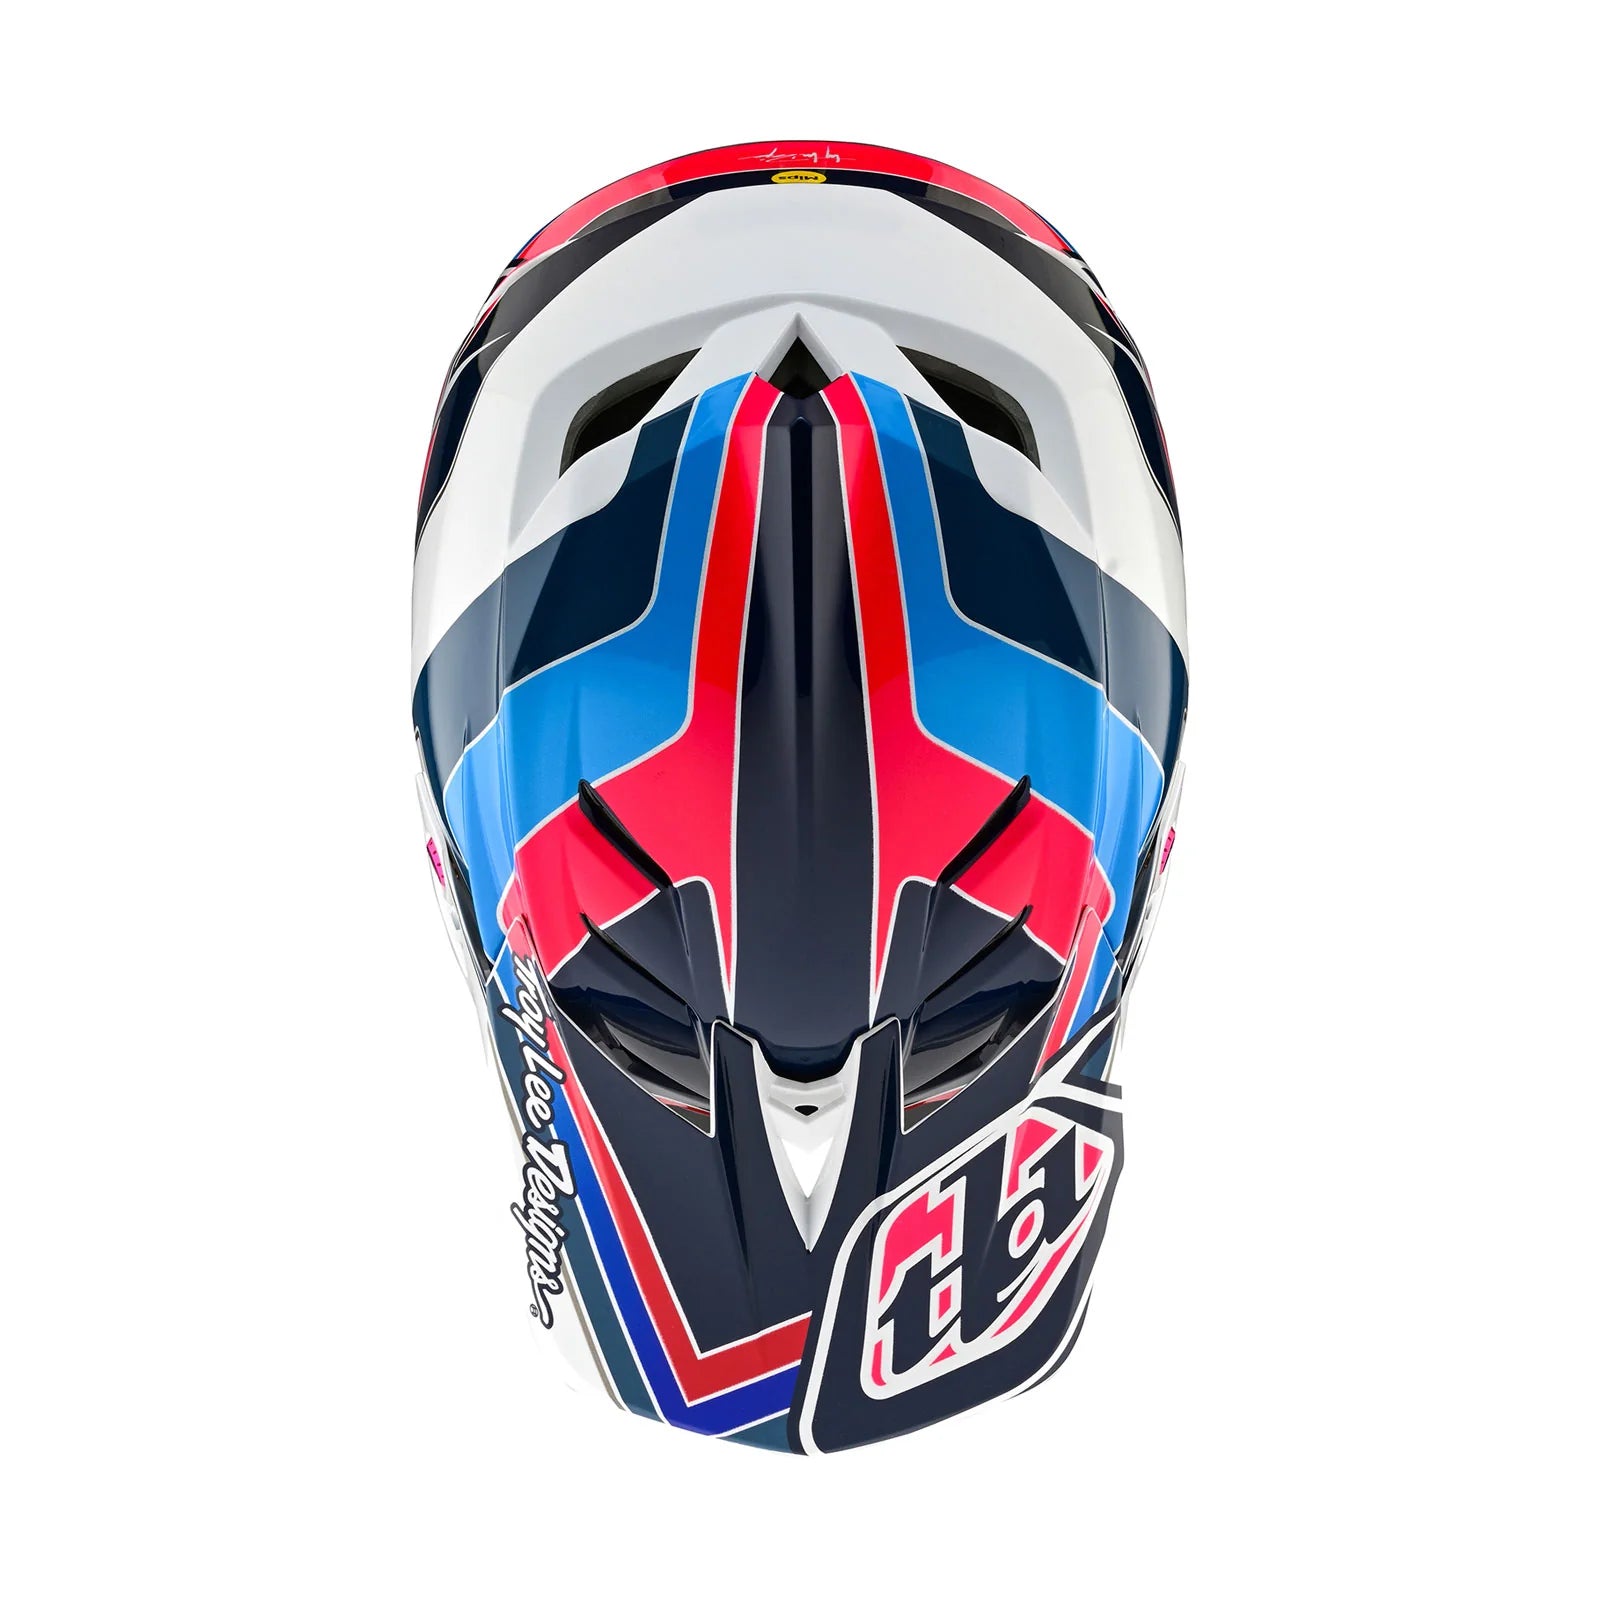 A TLD D4 AS Polyacrylite Helmet W/MIPS Block Blue / White with a red, blue, and white design.